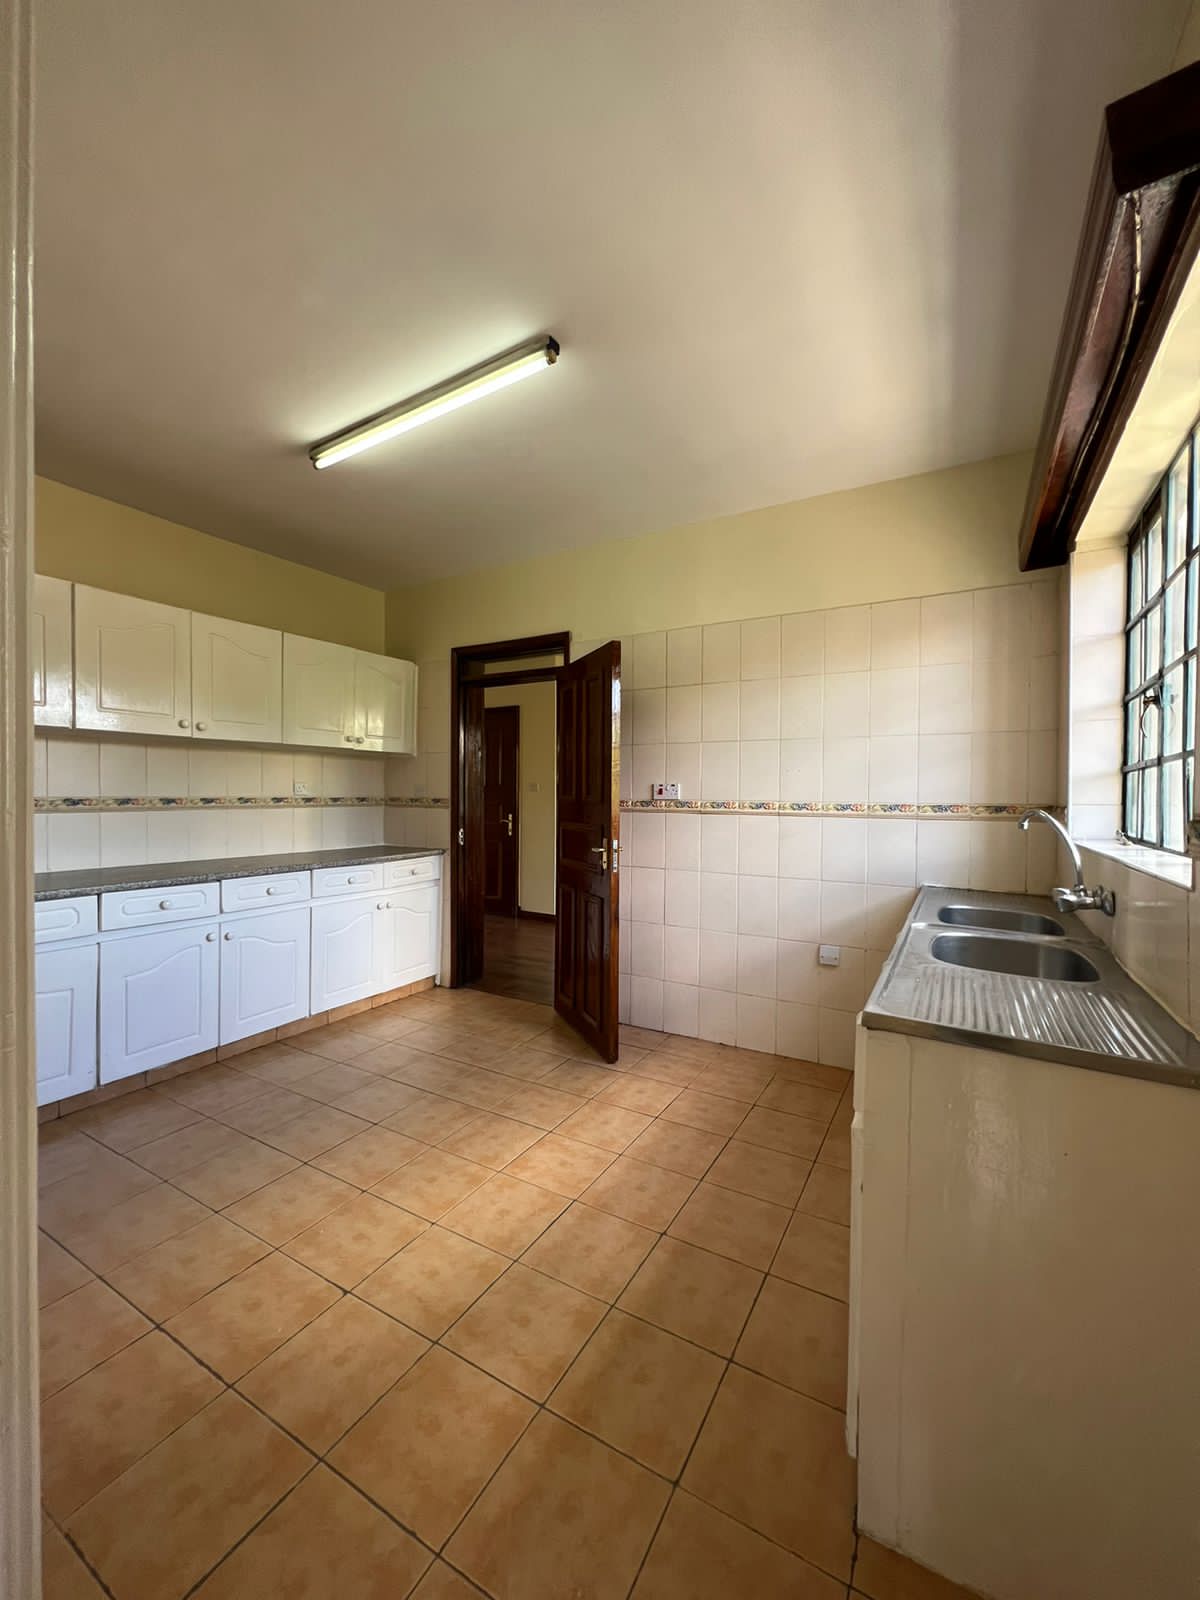 3 bedroom apartment for sale in Kilimani, Nairobi. Ample car parking, swimming pool. Ground floor. Sale 17.5Million. Listed by Musilli Homes